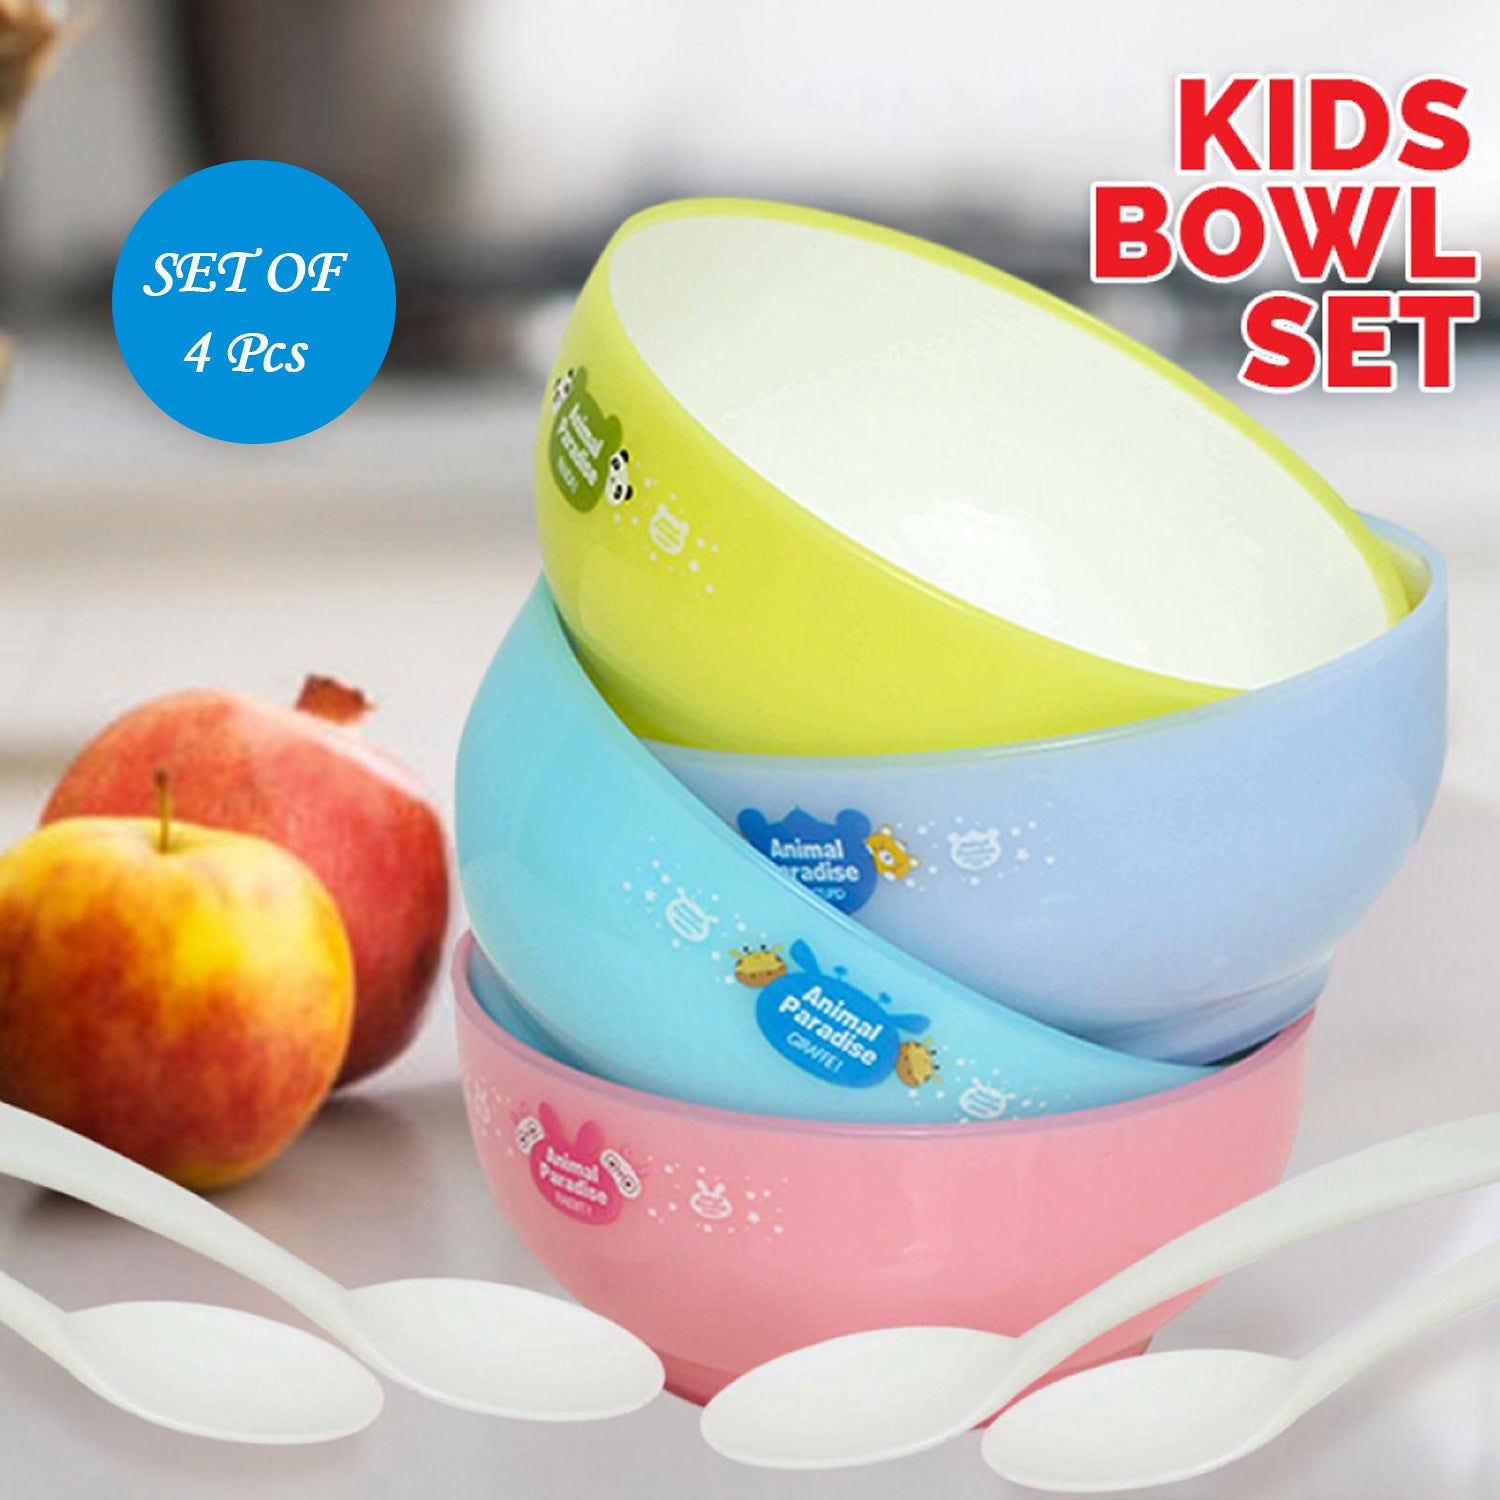 4816 Plastic Animal Cartoon Colorful Bowl set, 4 Pieces Bowl with 4 Spoons for Kids (Assorted Color)